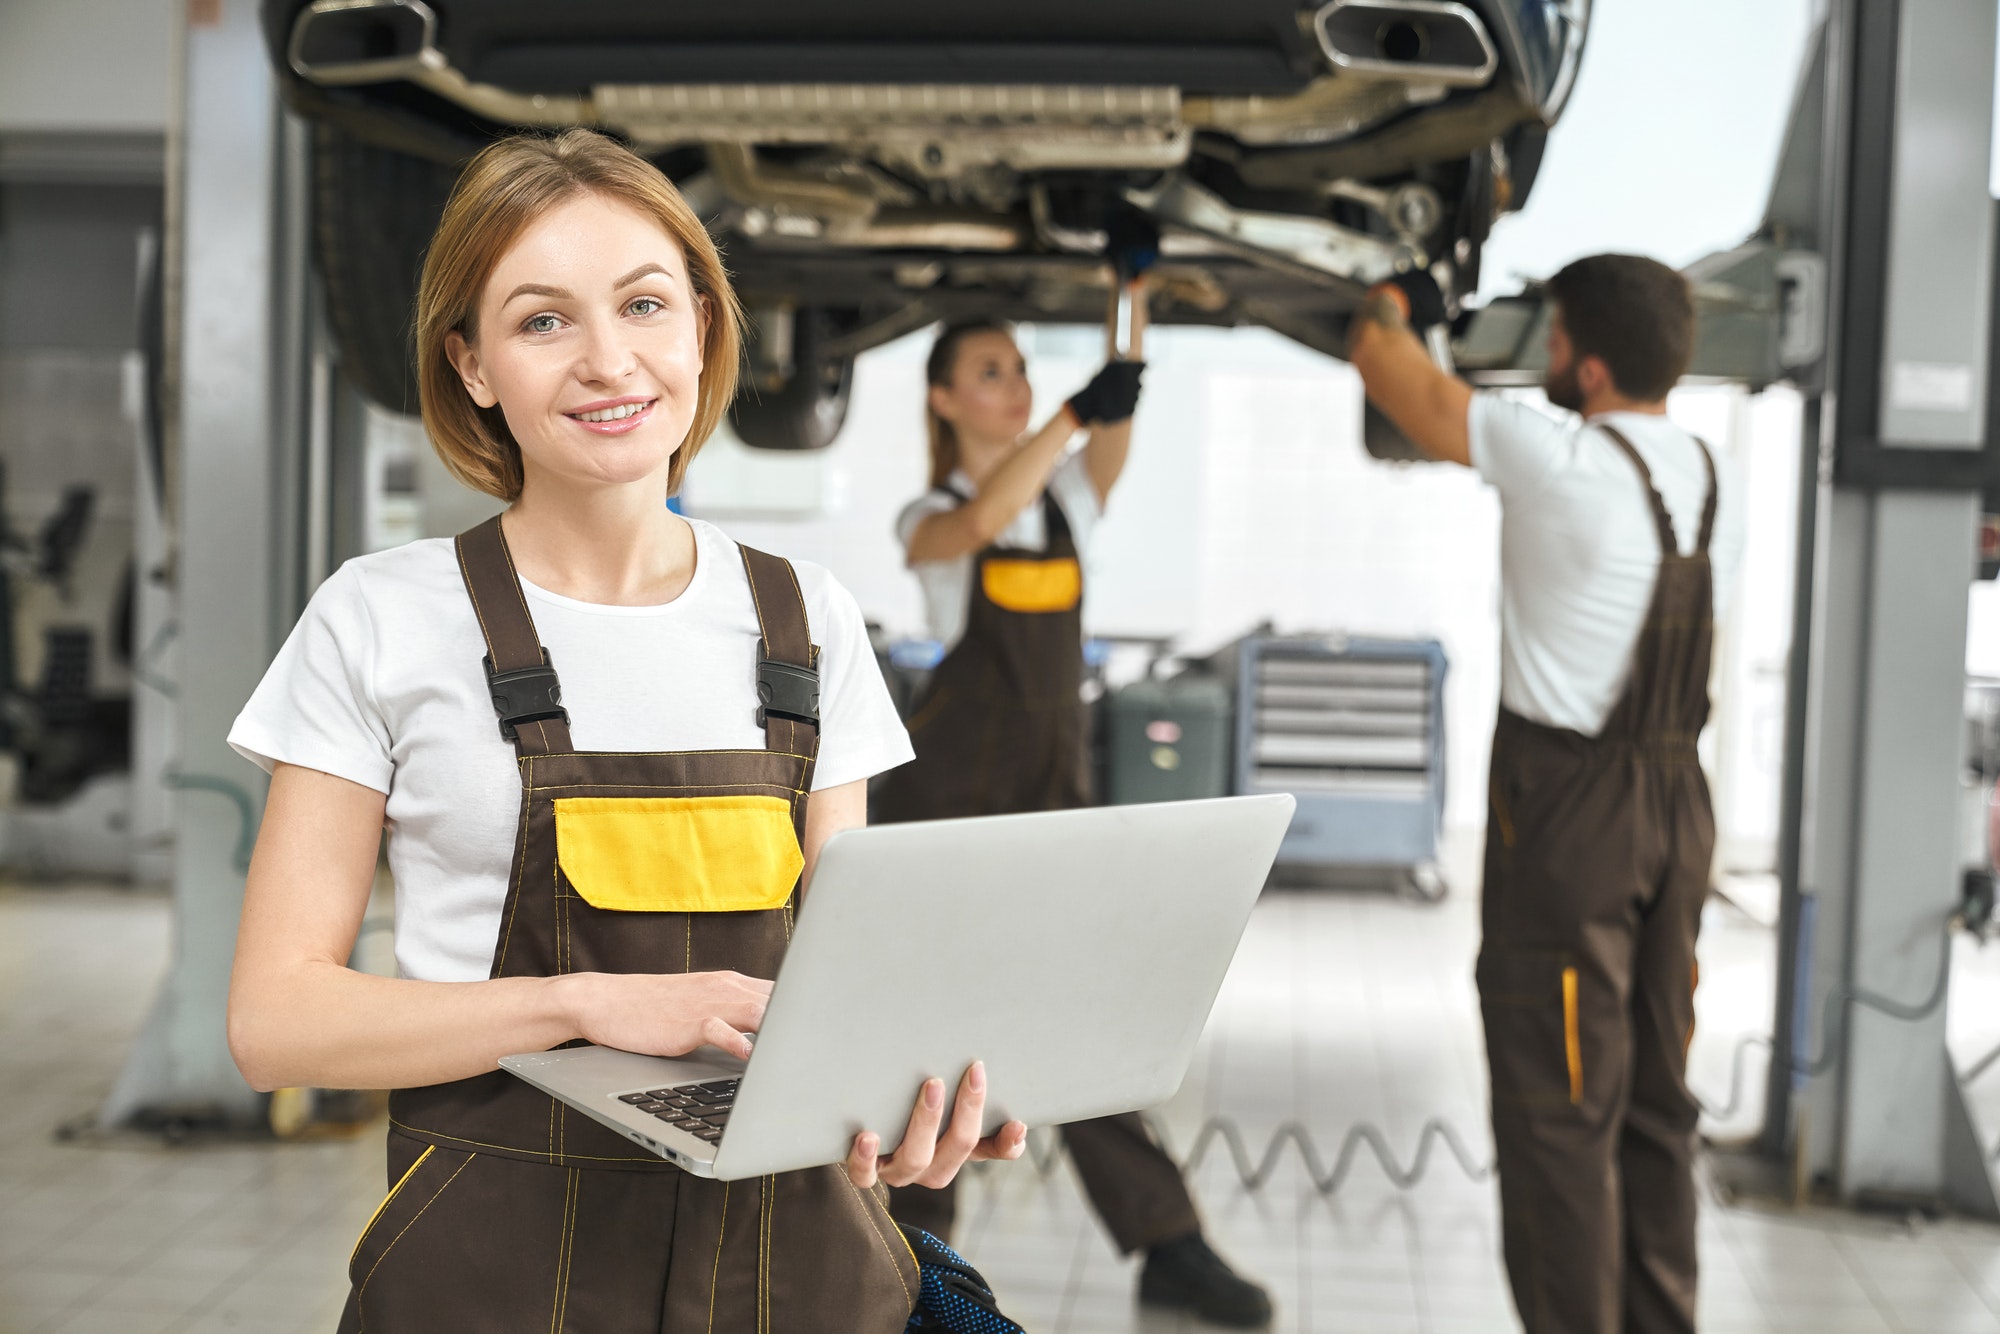 Pretty worker holding laptop, posing in autoservice